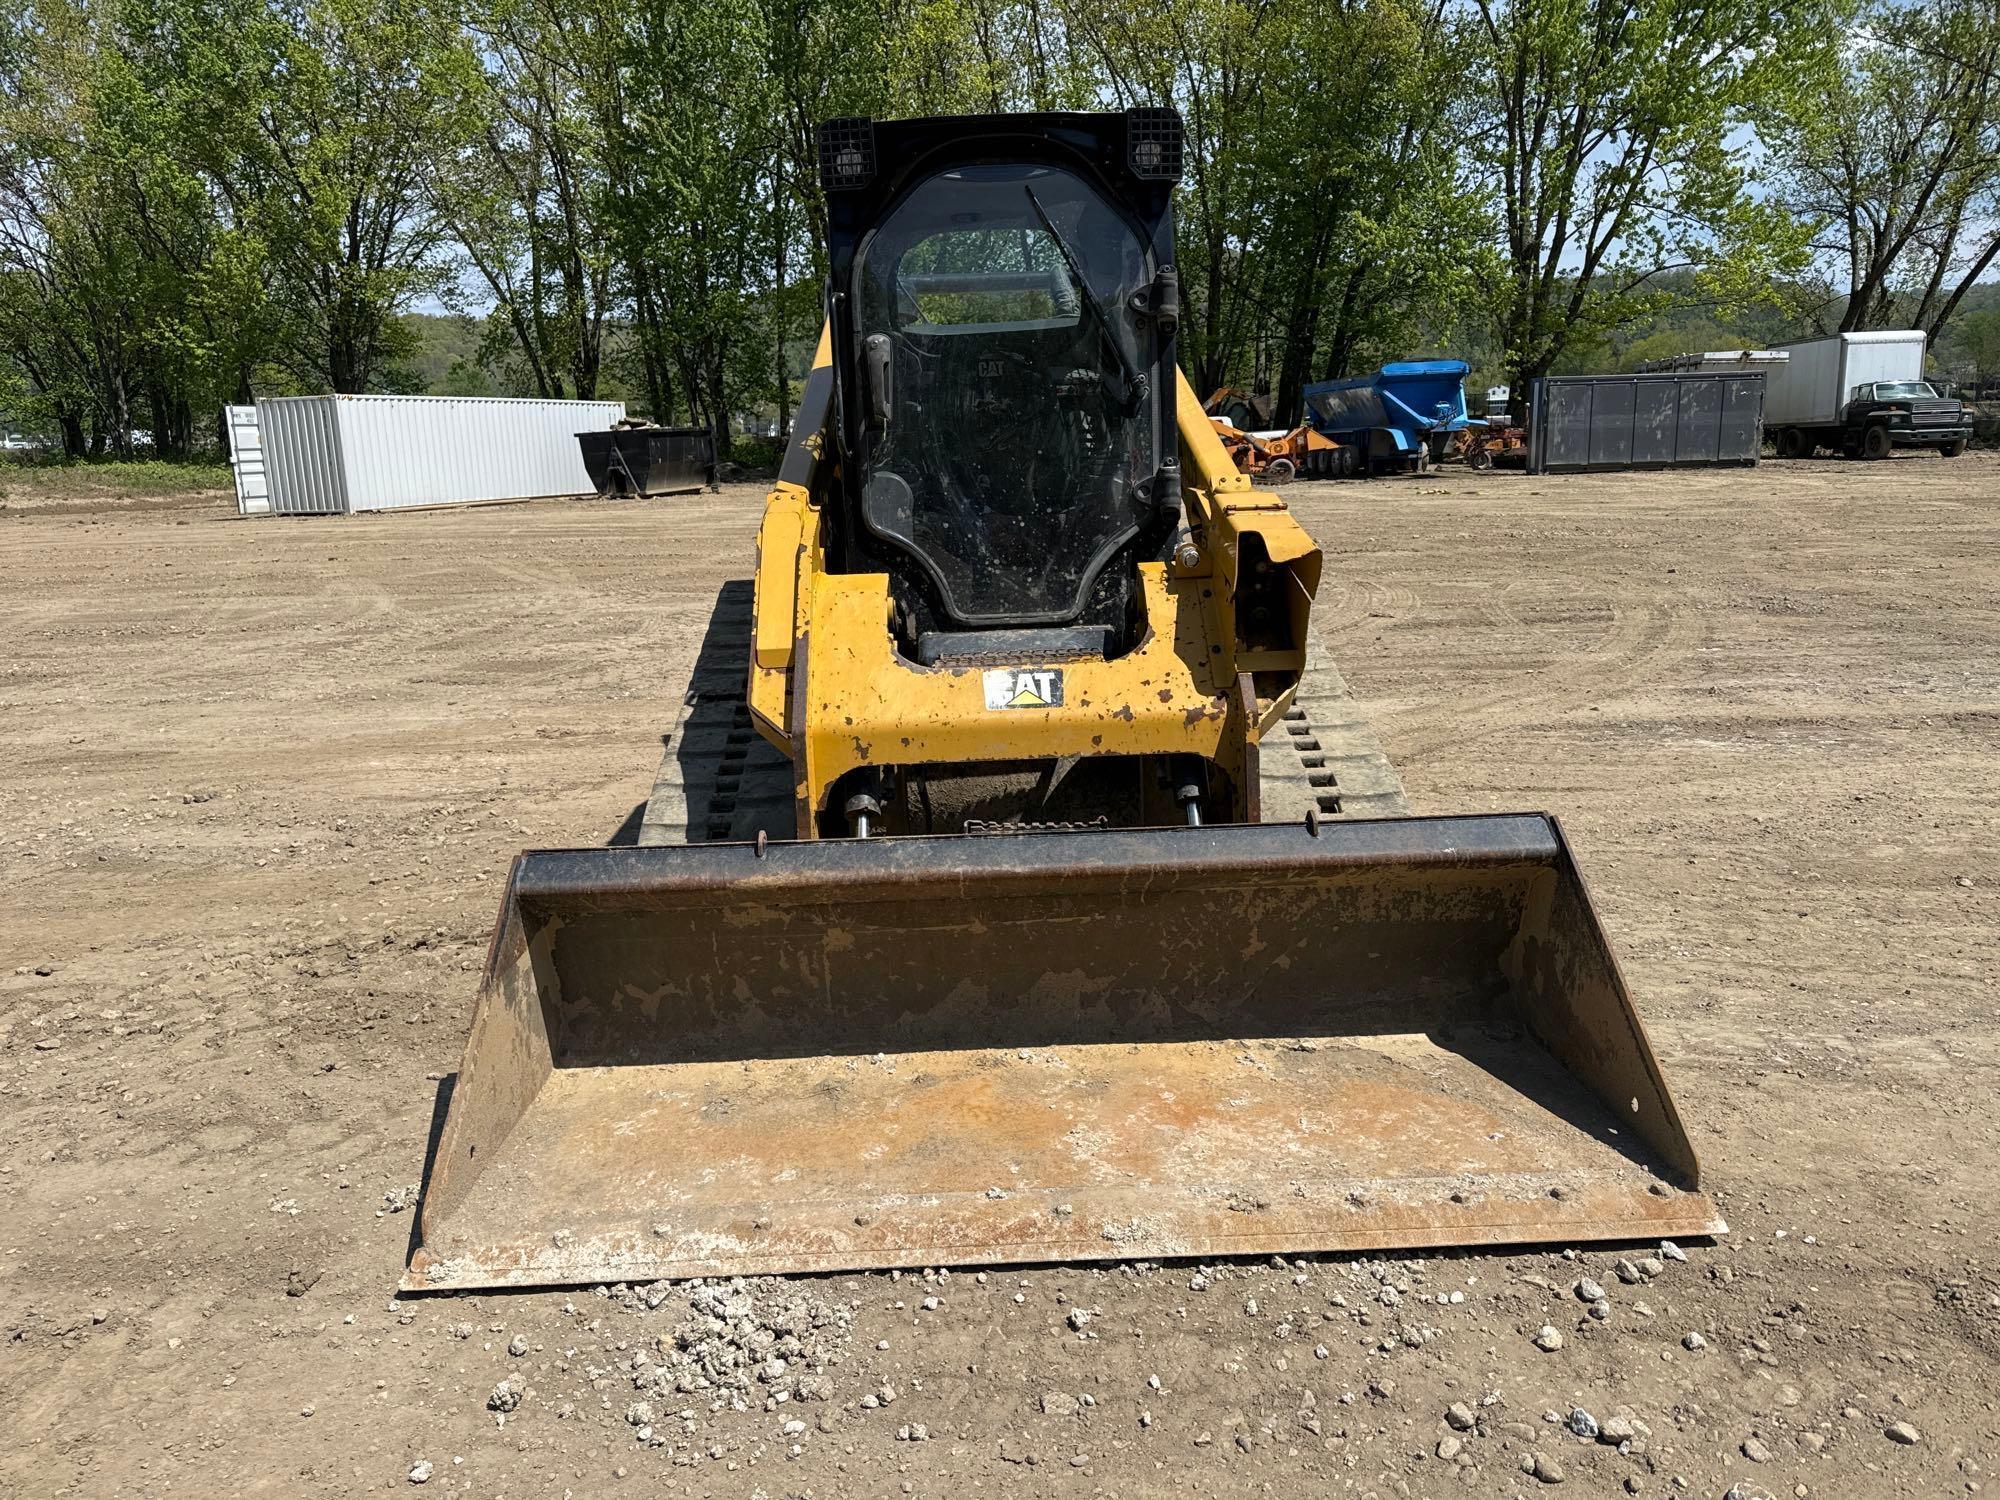 2016 CAT 299D2XHP RUBBER TRACKED SKID STEER SN:DX200299 powered by Cat diesel engine, equipped with